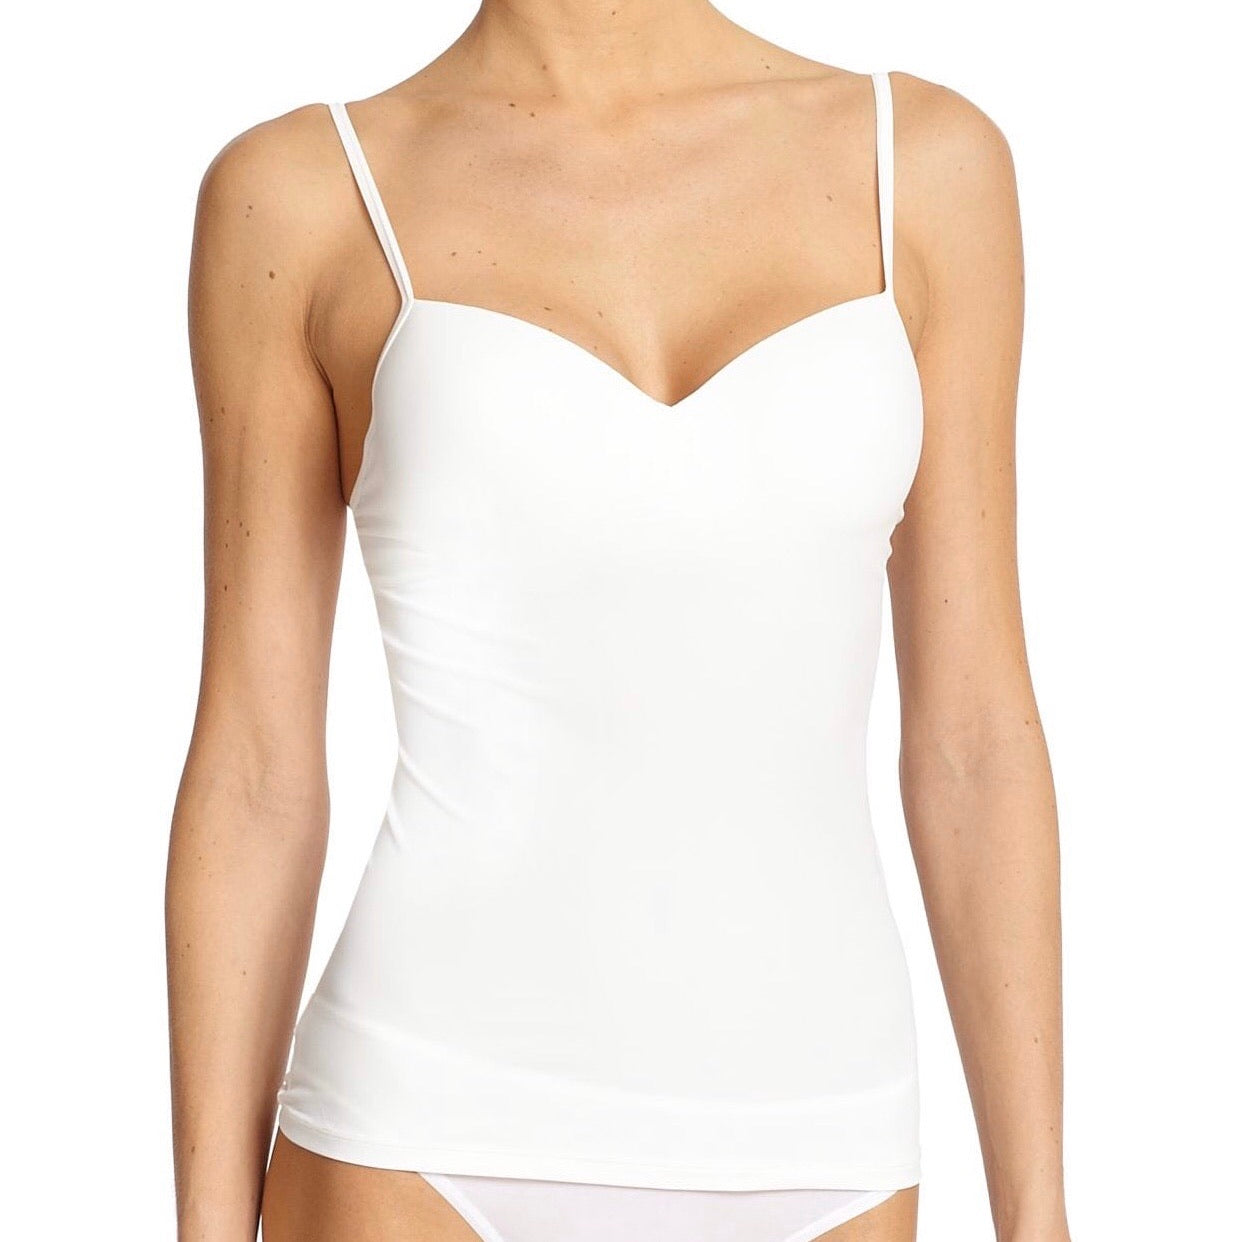 Allure cami with built in bra